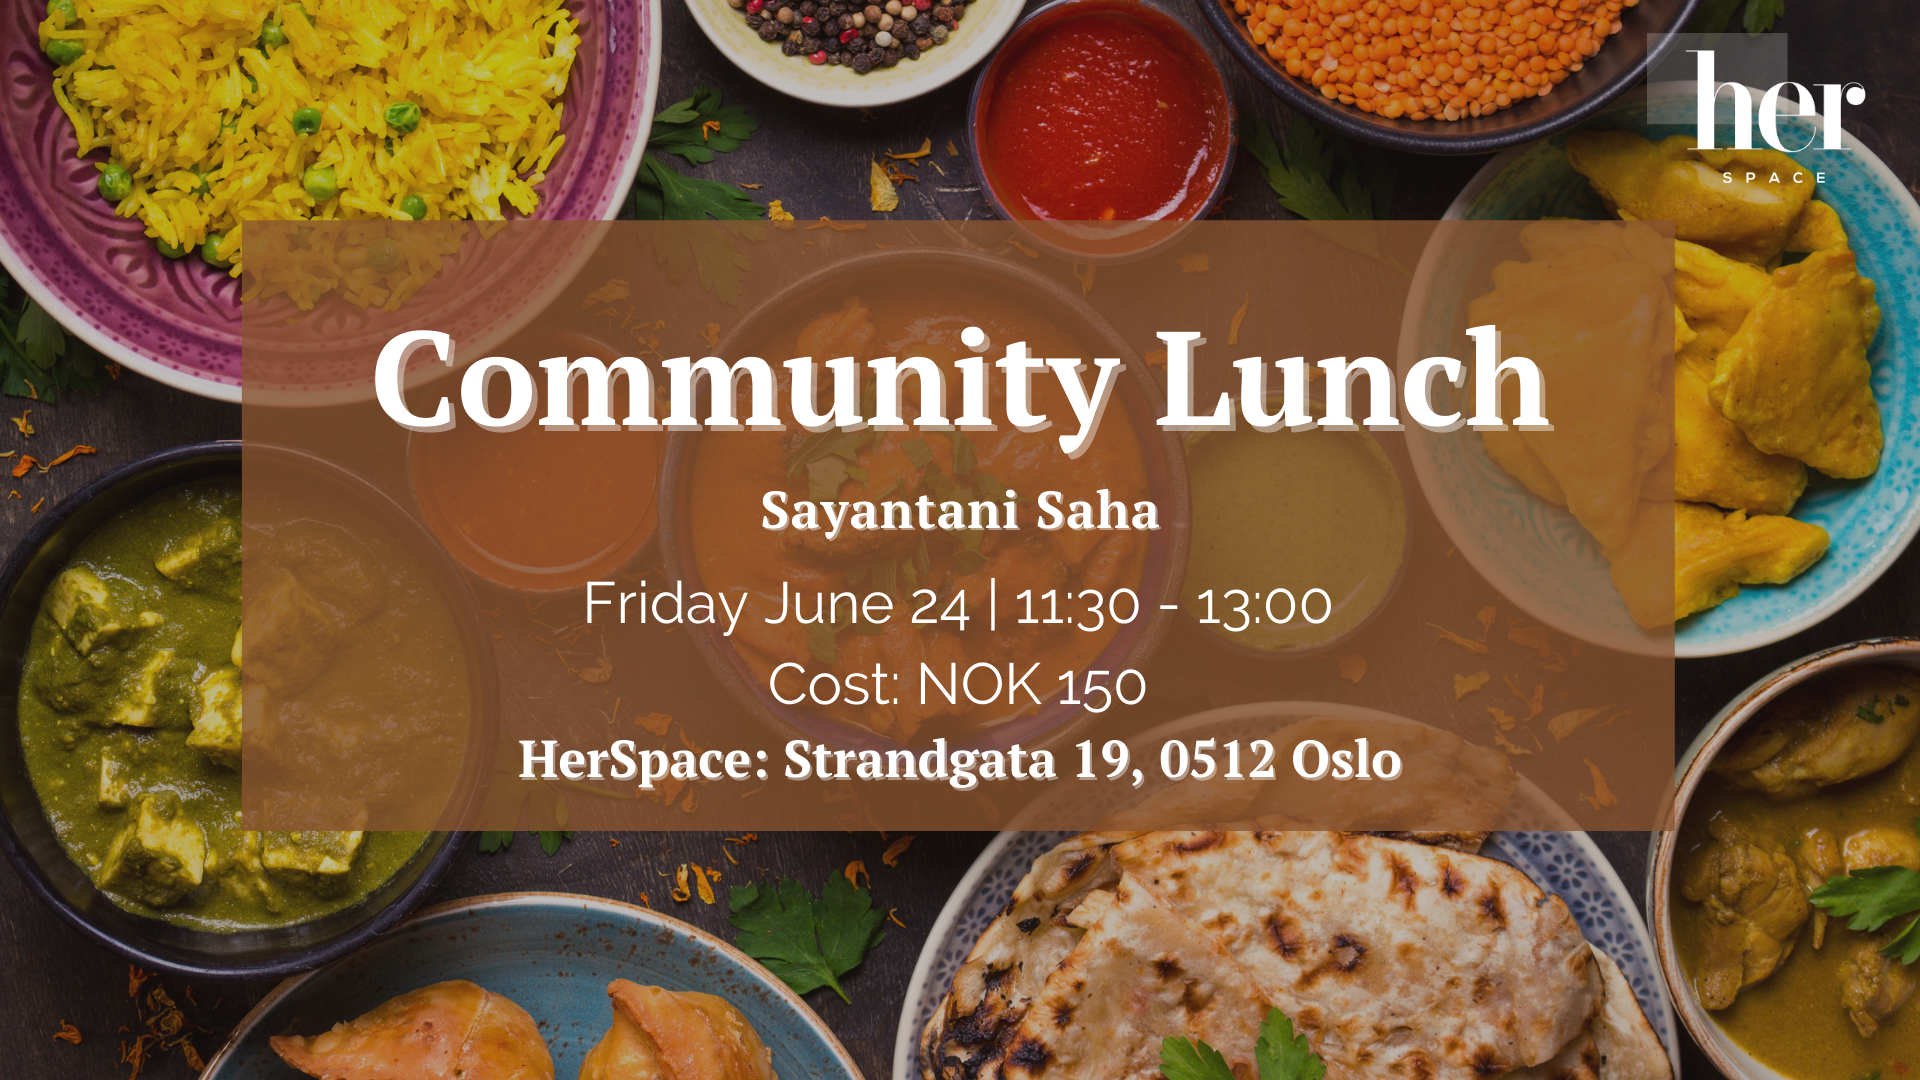 Community Lunch at HerSpace